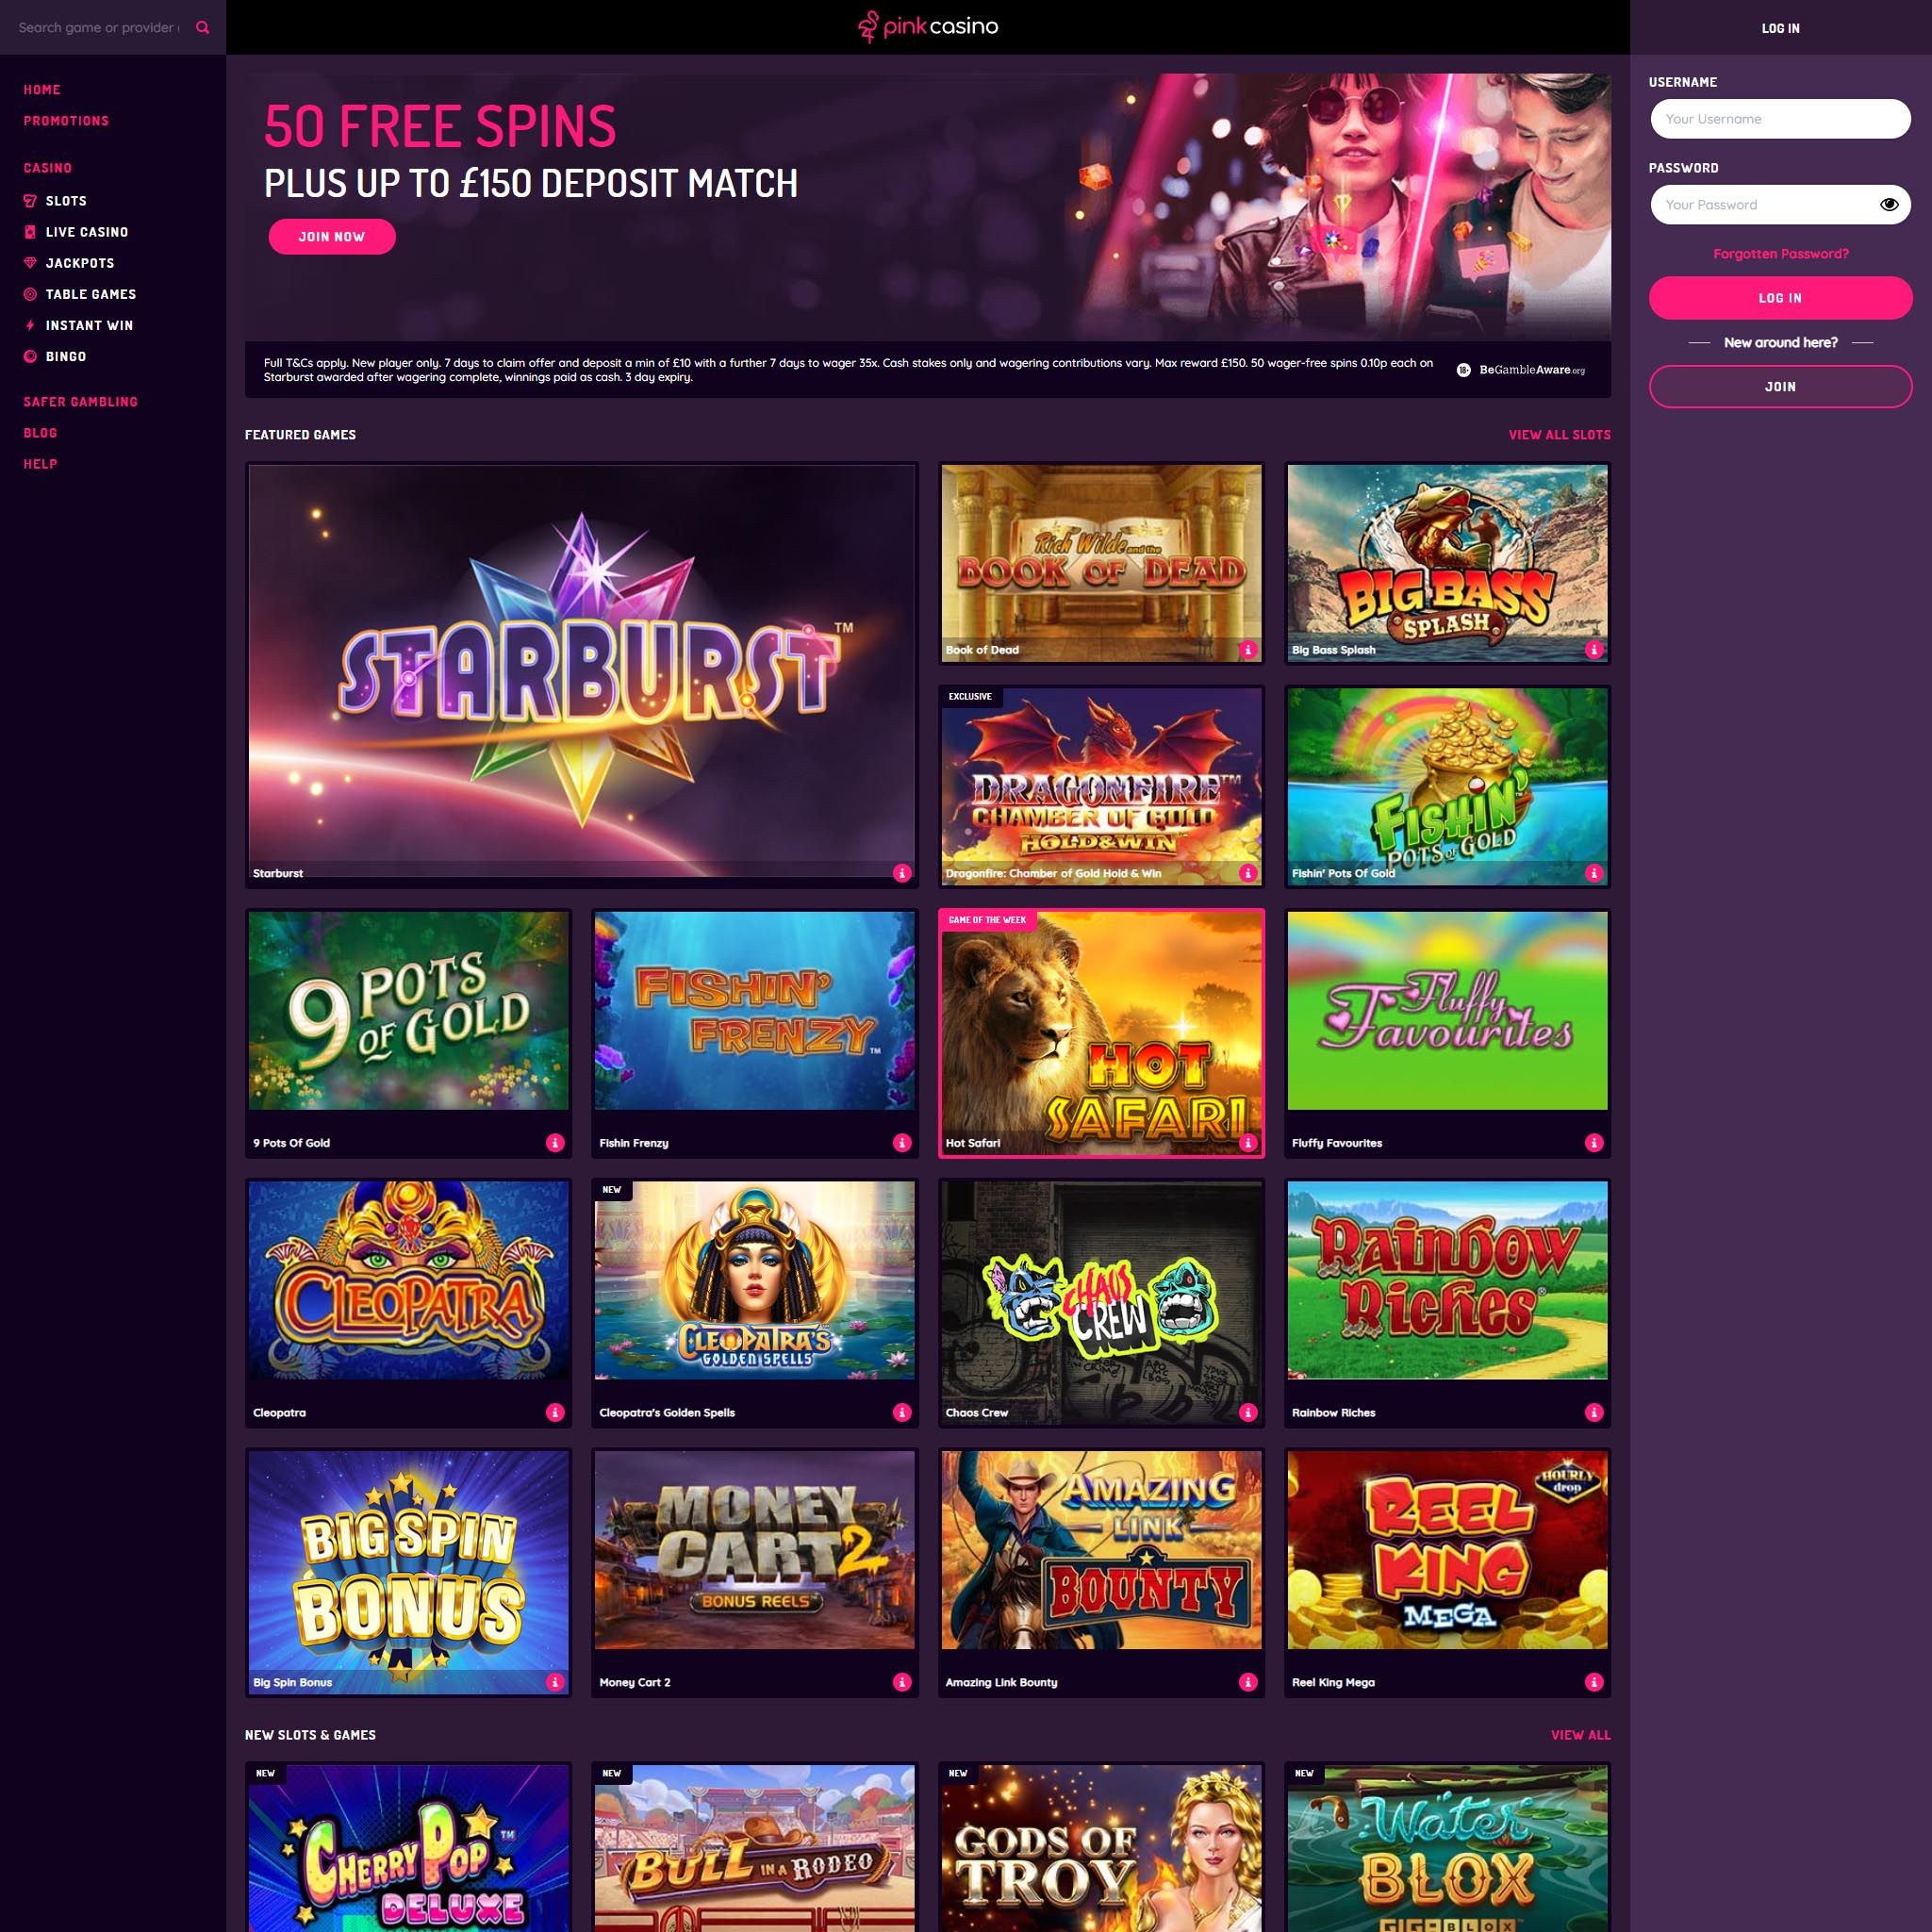 Pink Casino review